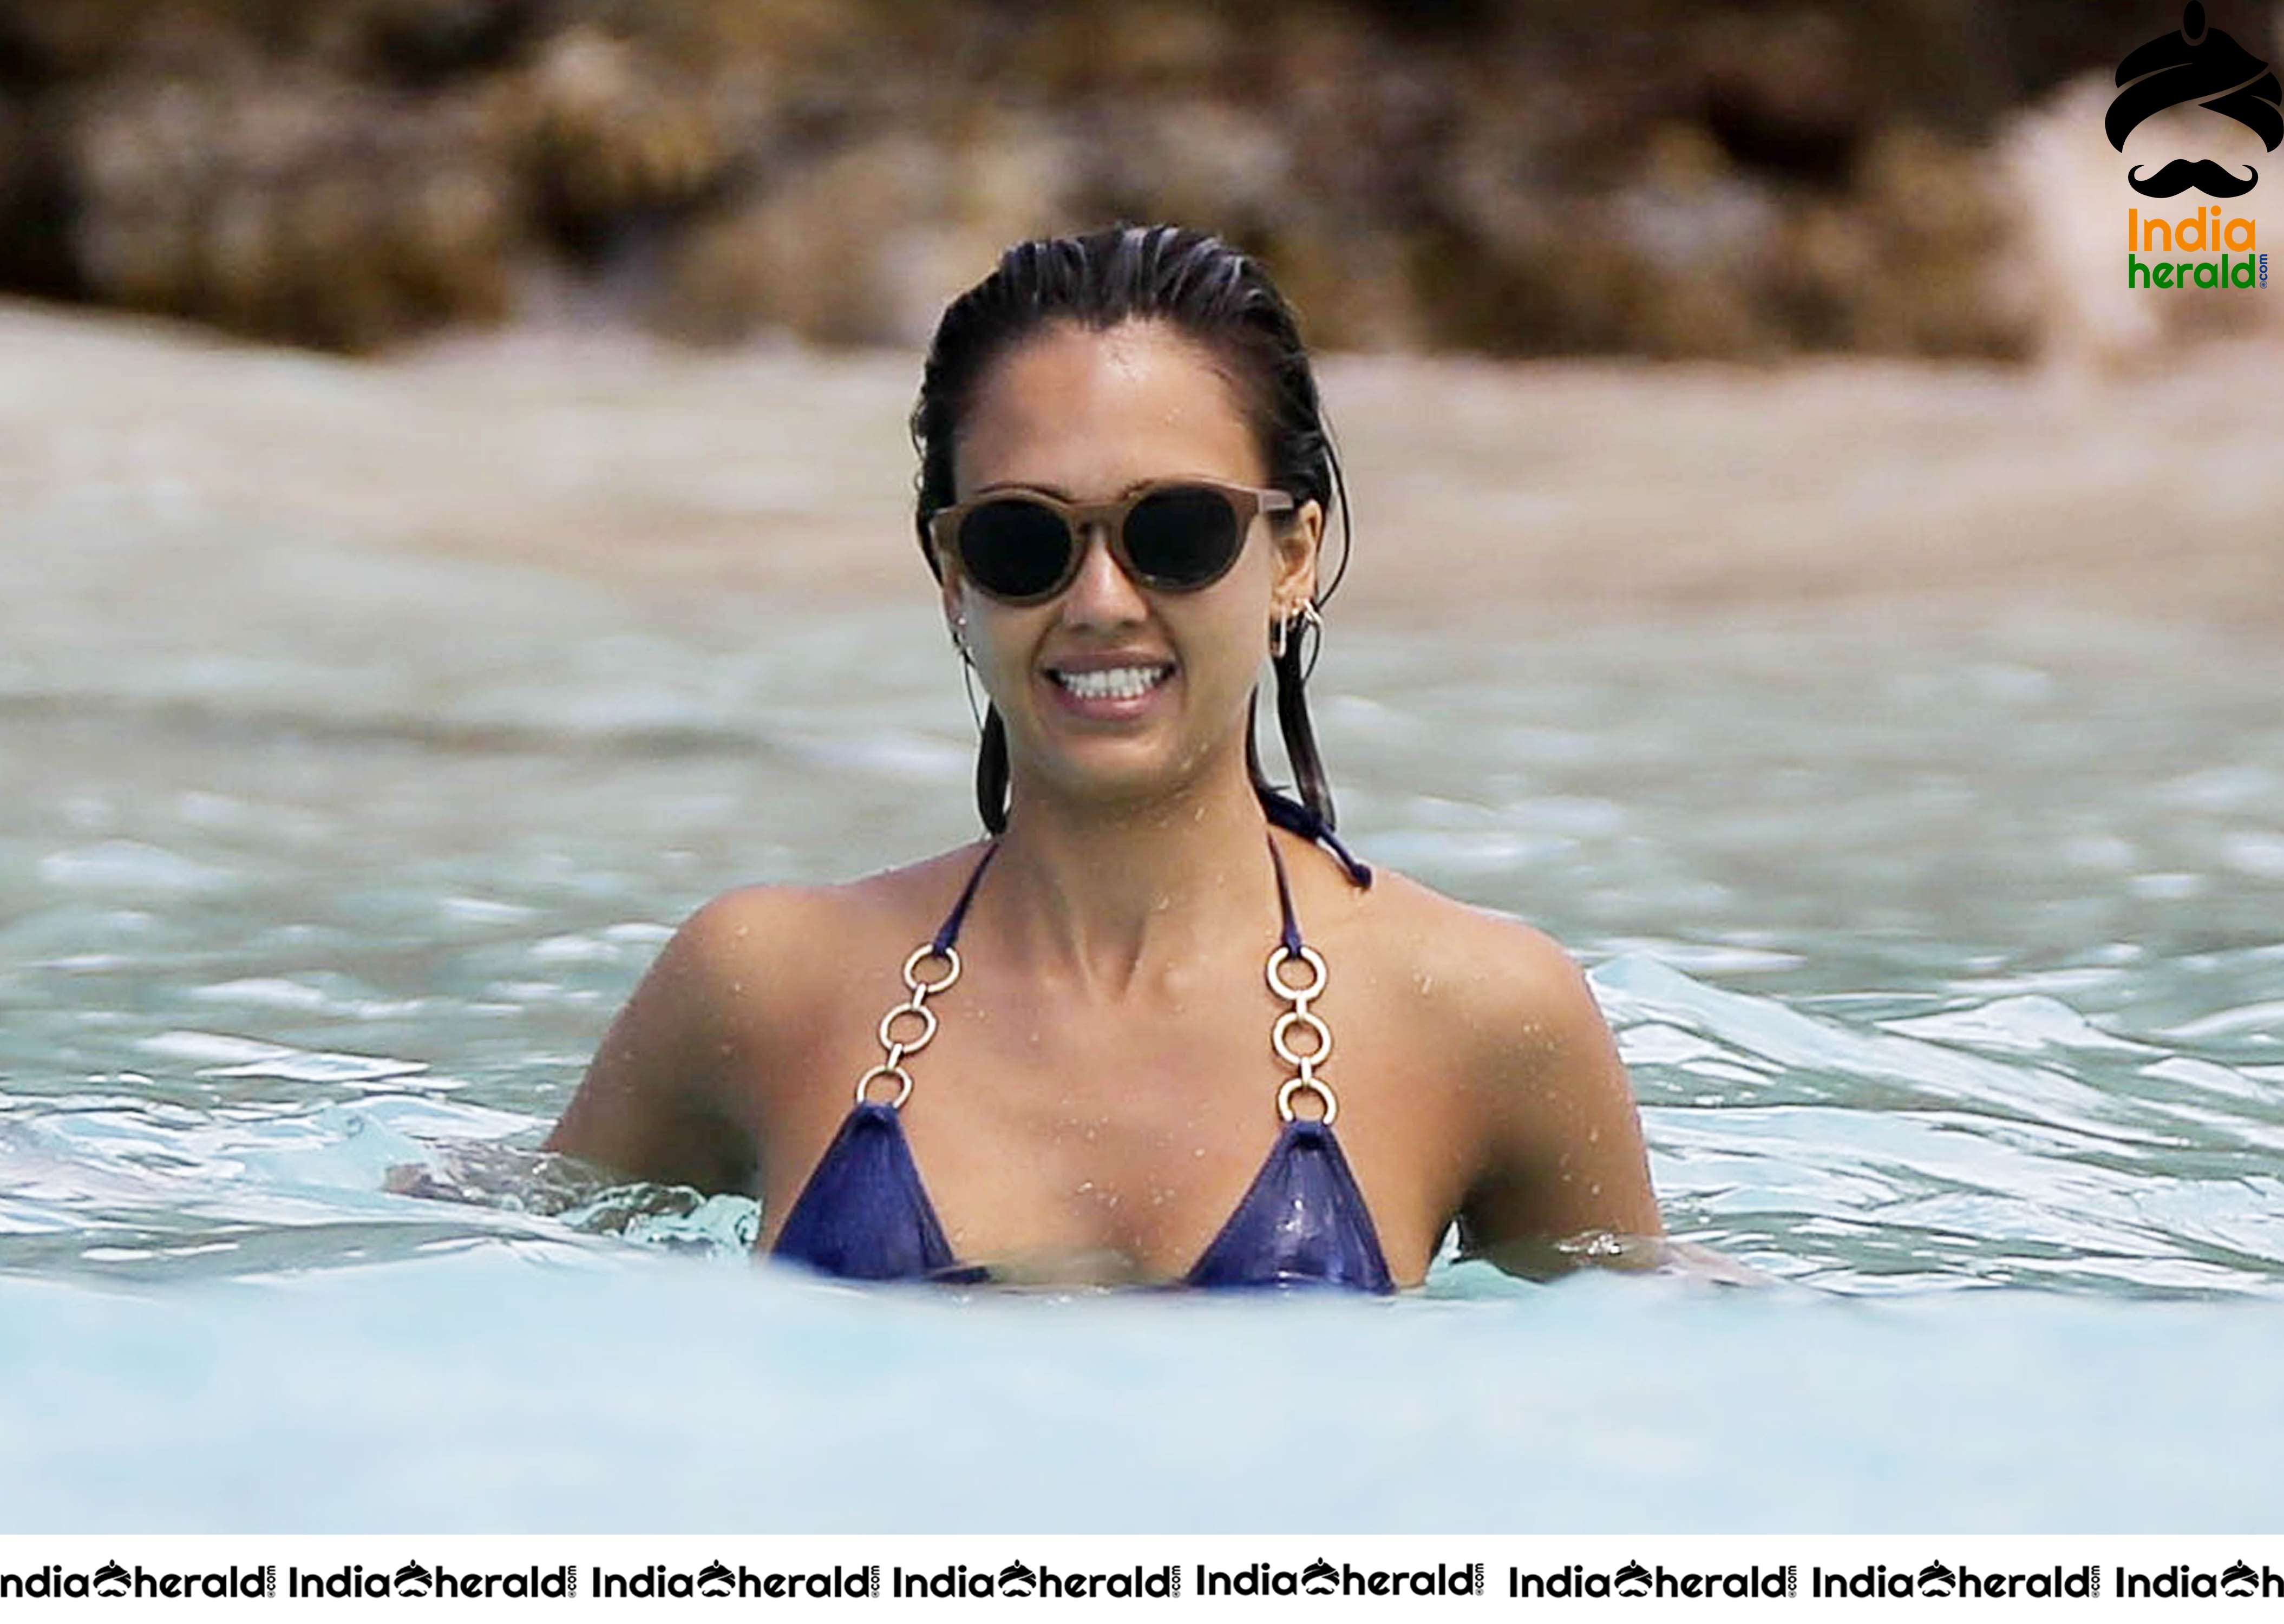 38 Year Old Jessica Alba Spotted In Thin Lace Bikini As Gets Ready For Scuba Diving Set 2